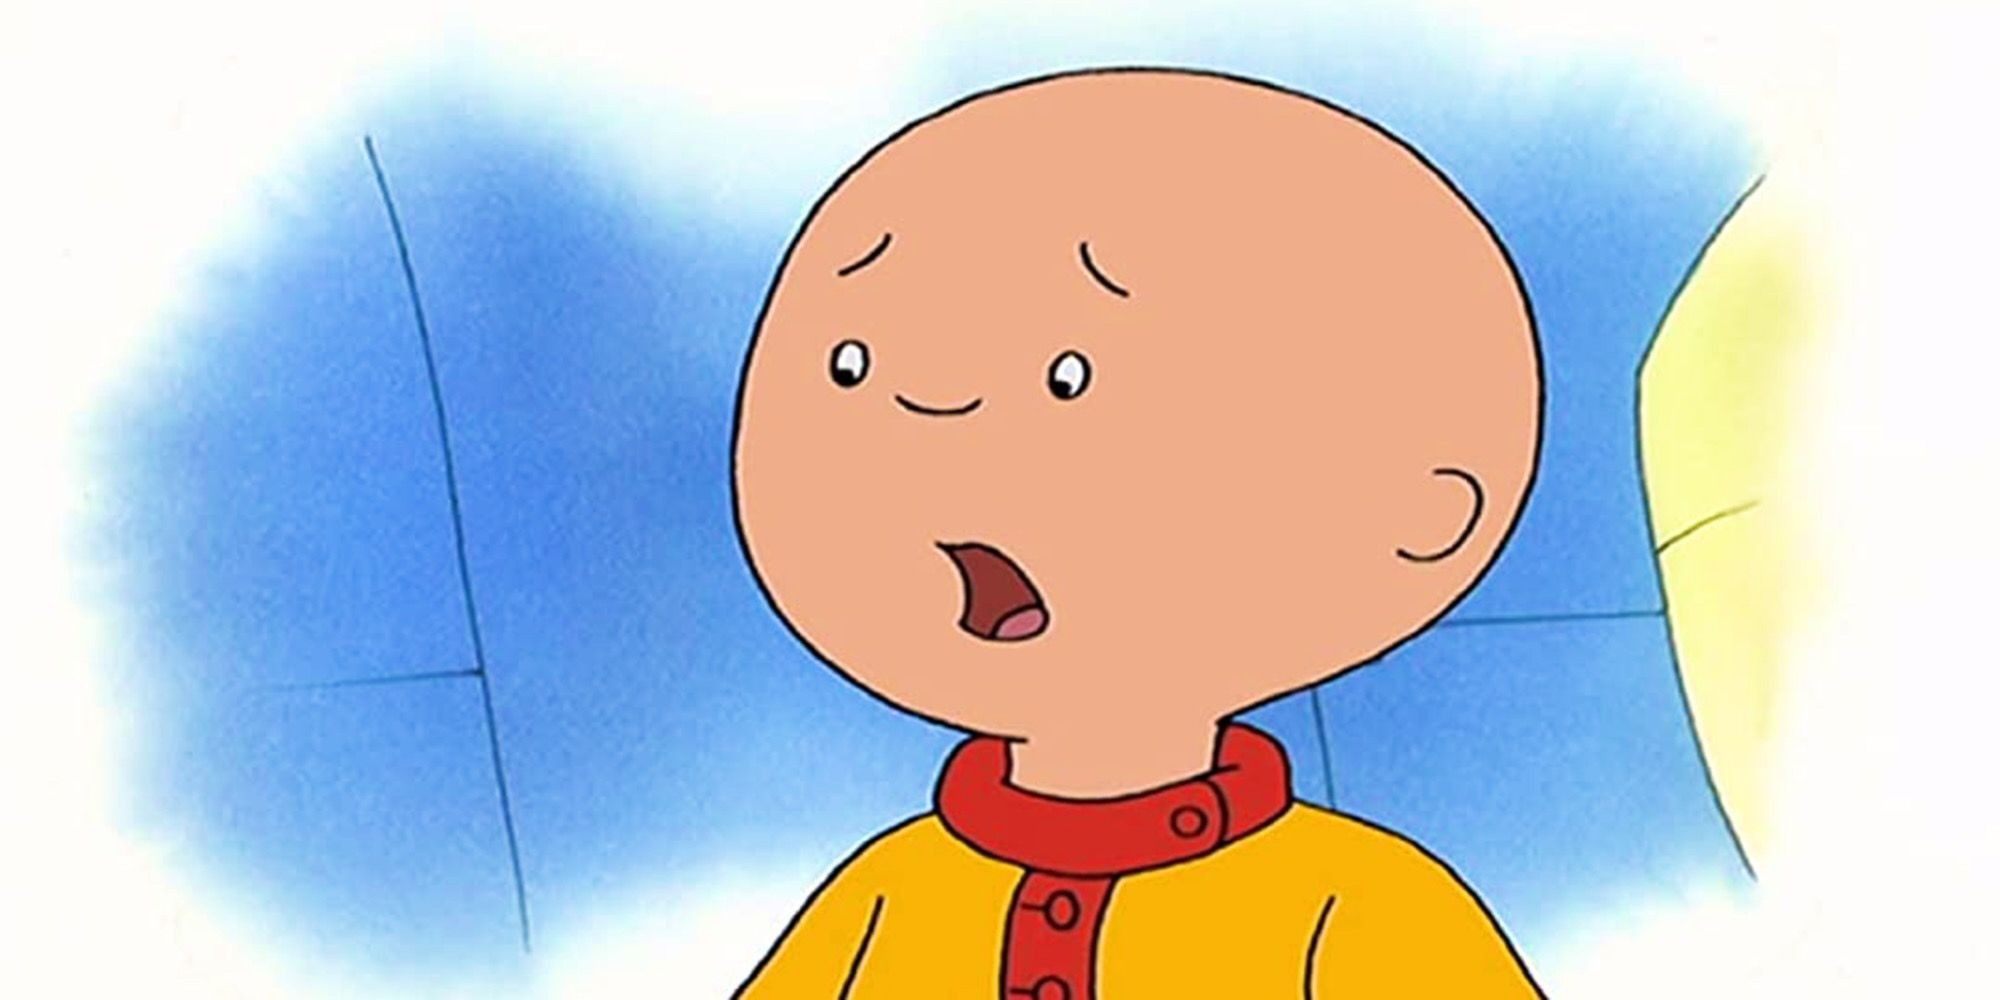 10 Most Annoying Kids TV Characters Of All Time, According To Reddit